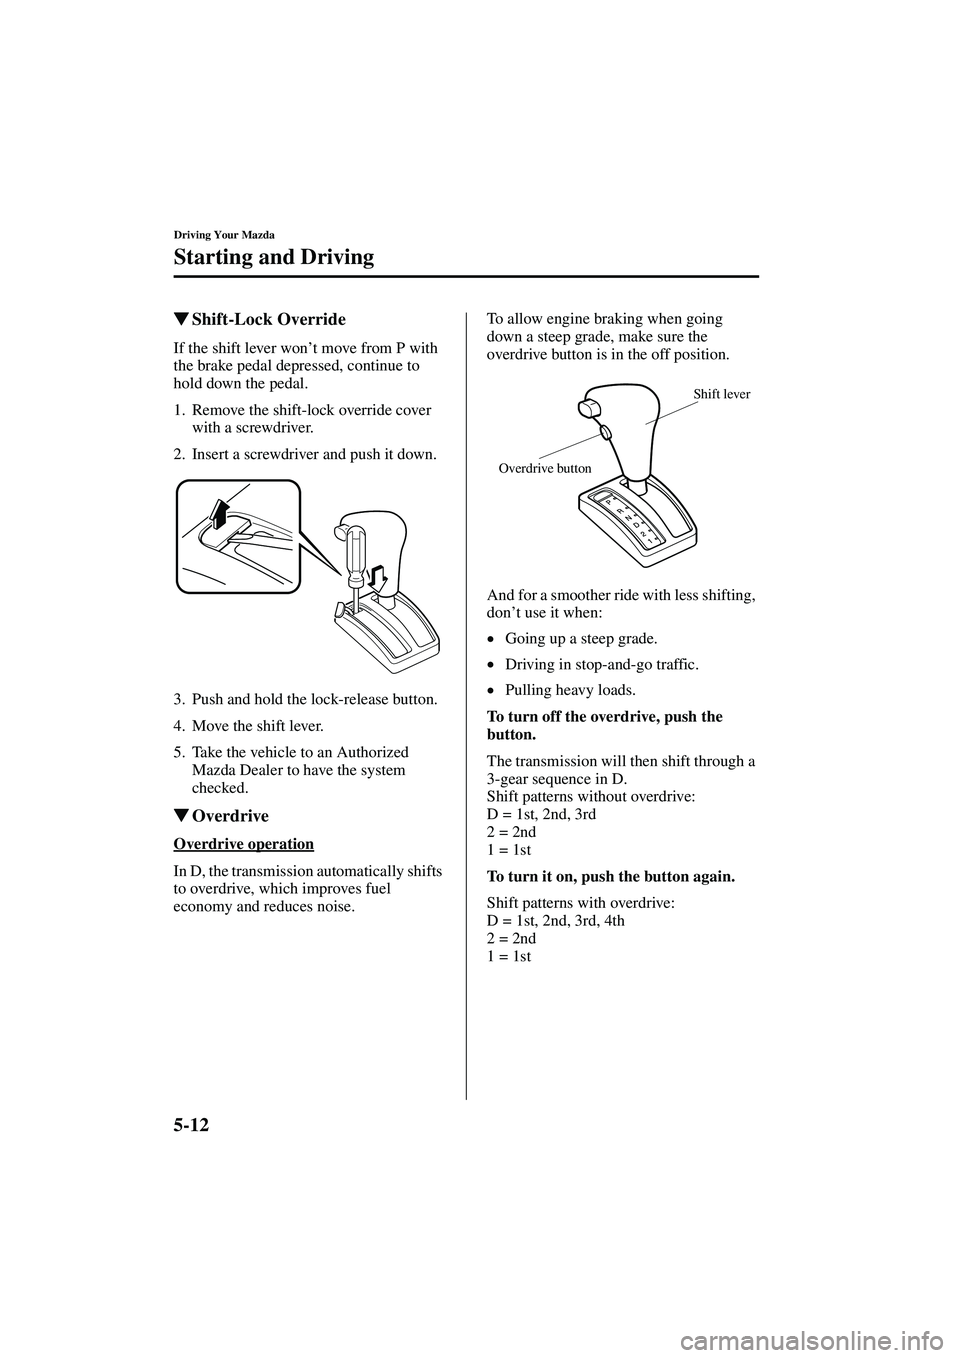 MAZDA MODEL MX-5 MIATA 2003  Owners Manual 5-12
Driving Your Mazda
Starting and Driving
Form No. 8R09-EA-02G
Shift-Lock Override
If the shift lever won
’t move from P with 
the brake pedal depressed, continue to 
hold down the pedal.
1. Rem